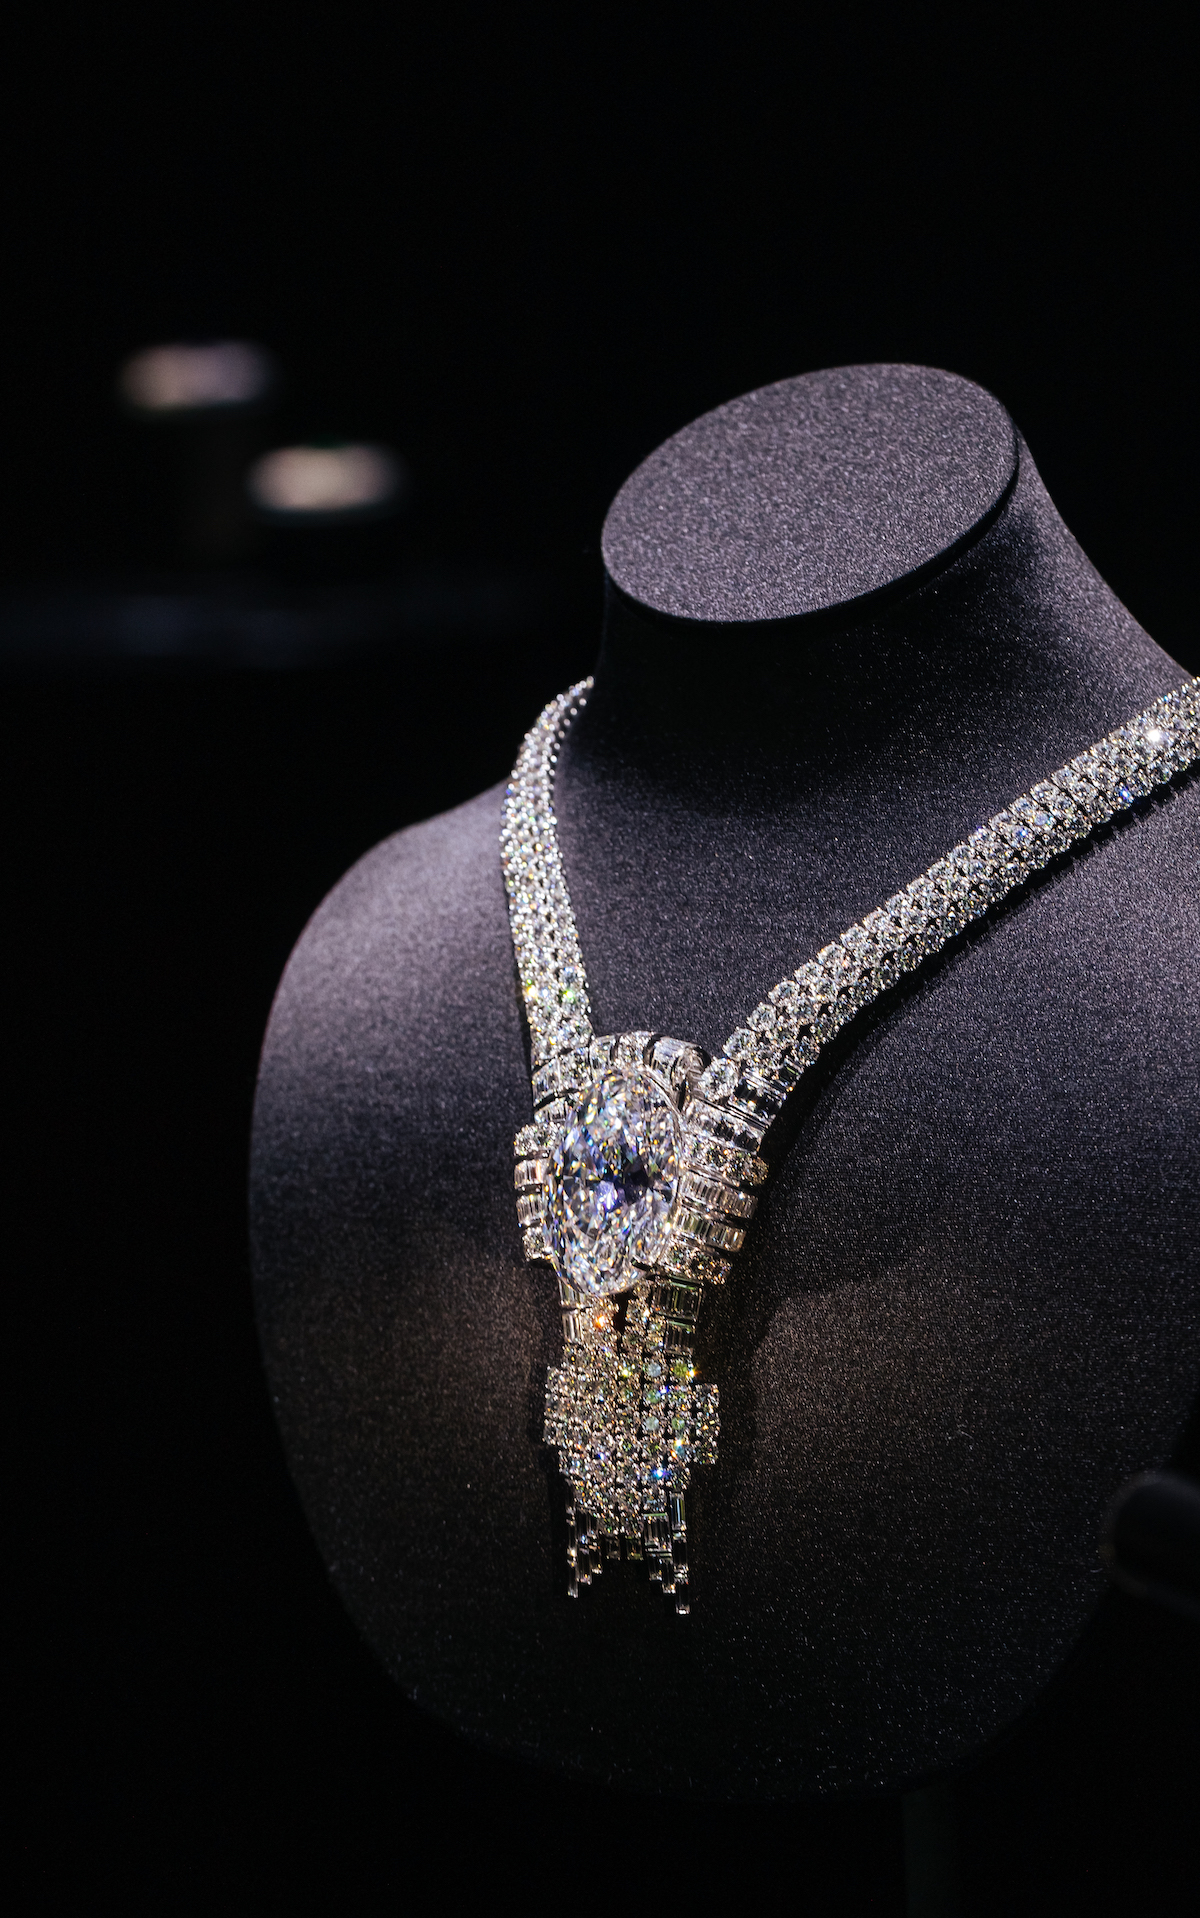 The World's Most Expensive Diamond Necklace | myGemma